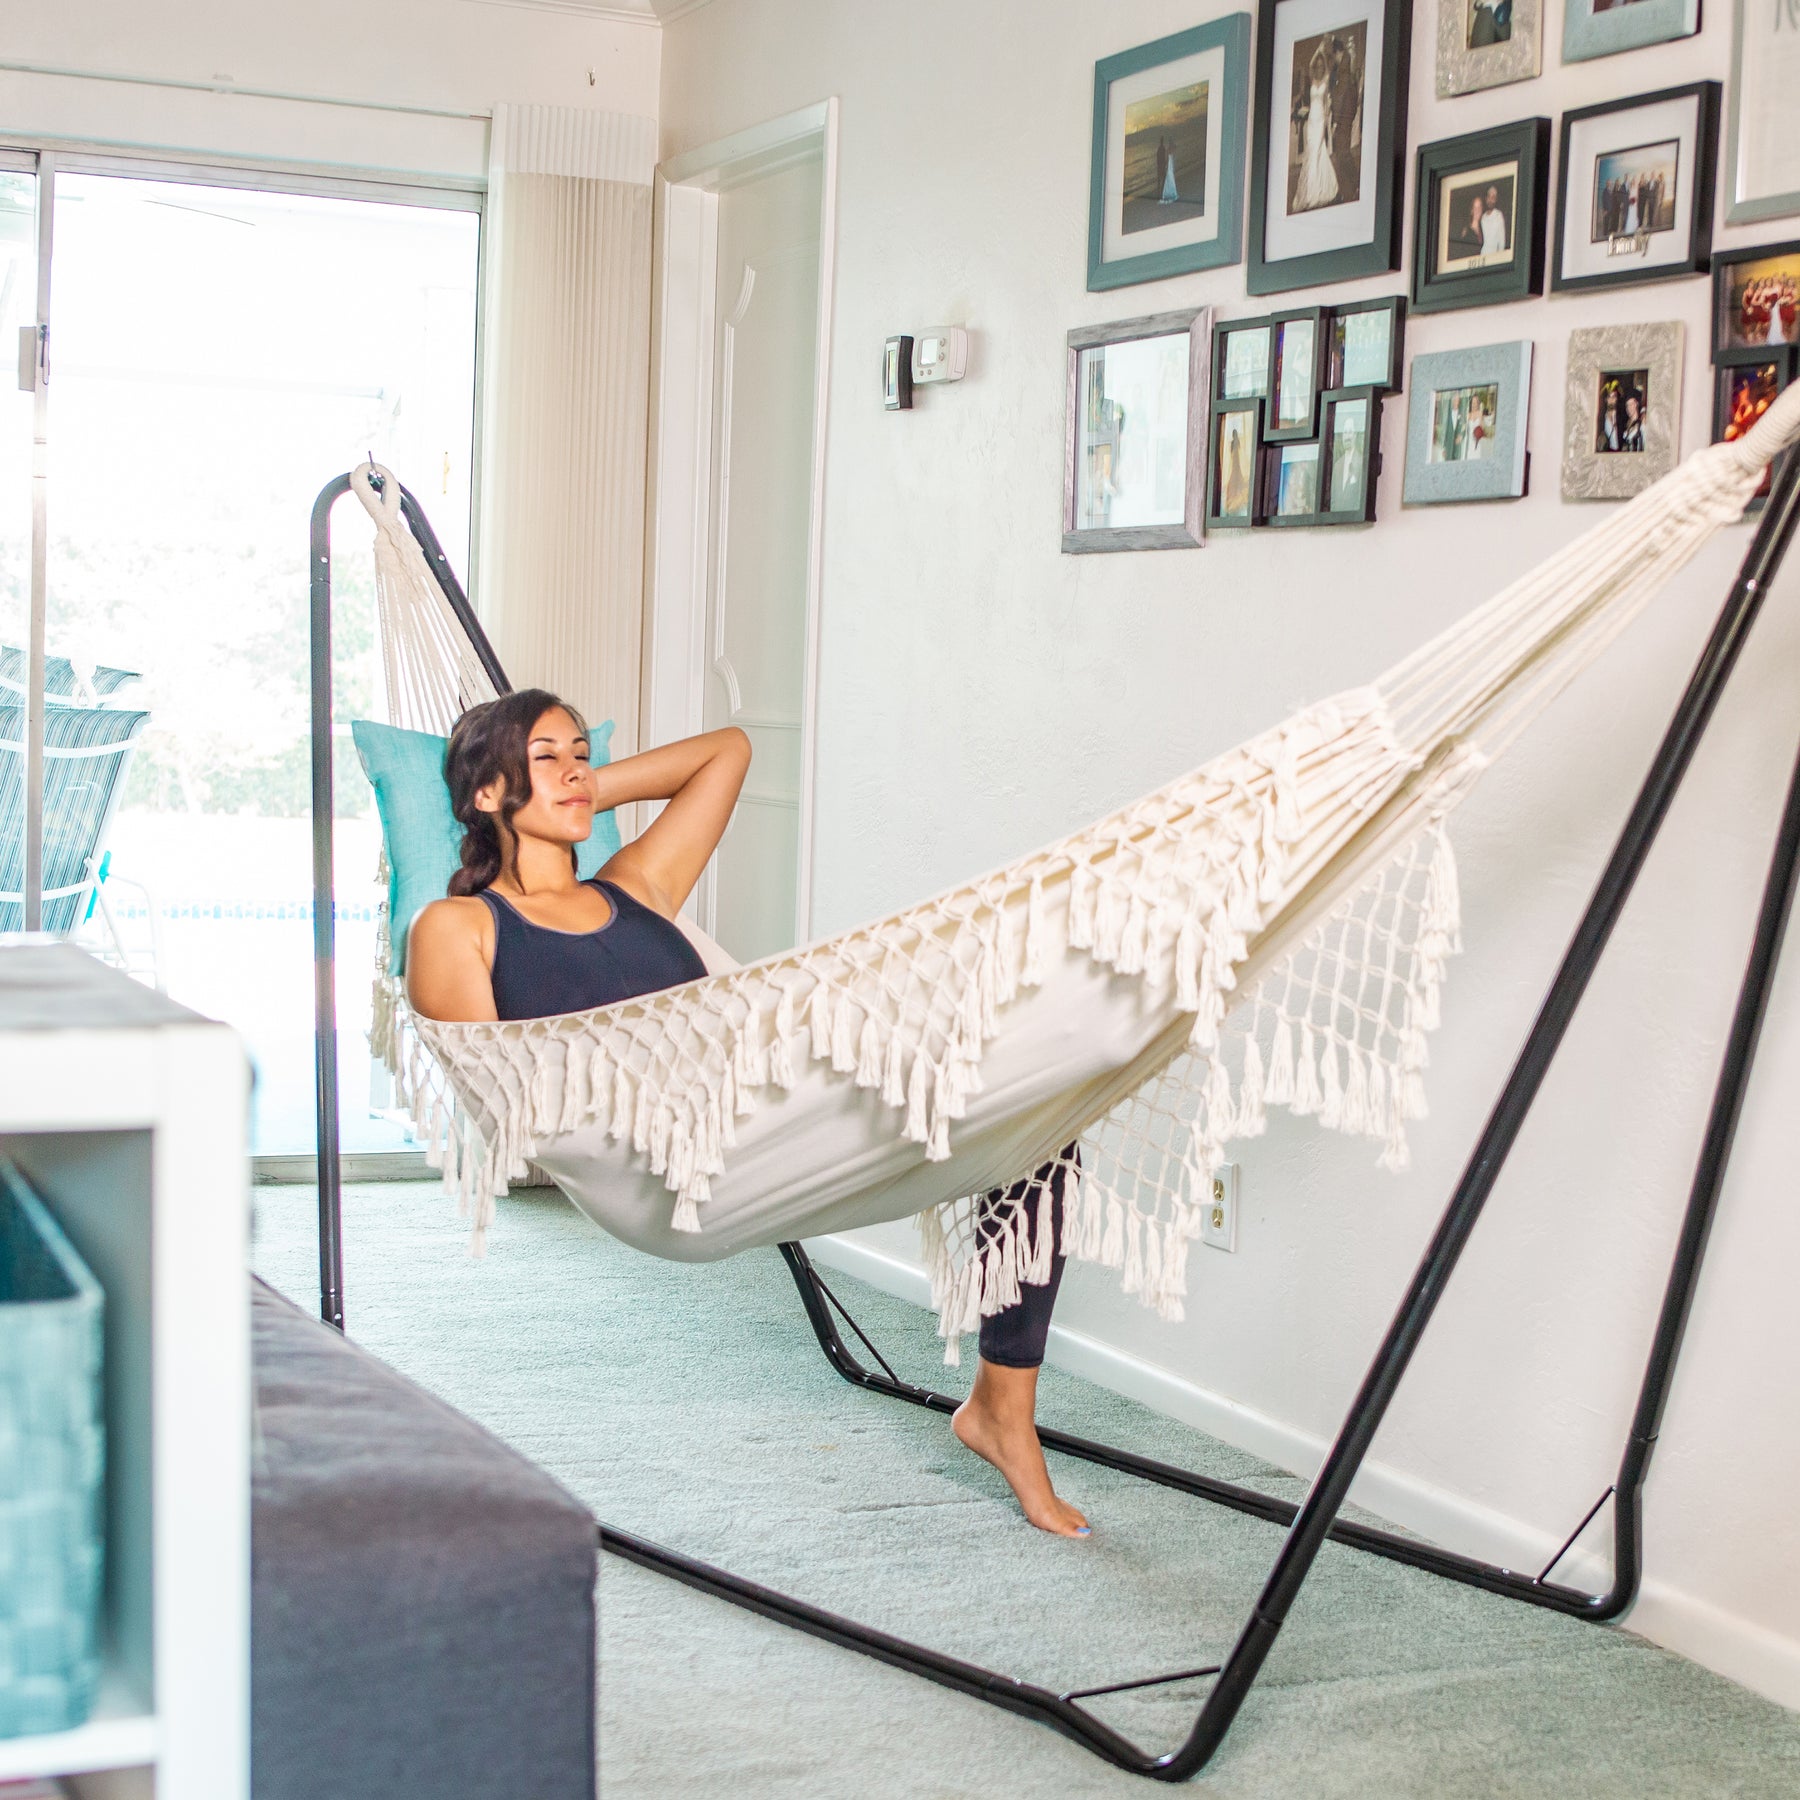 Woman relaxing a Bliss Hammocks fringed hammock attached to a hammock stand inside a house.